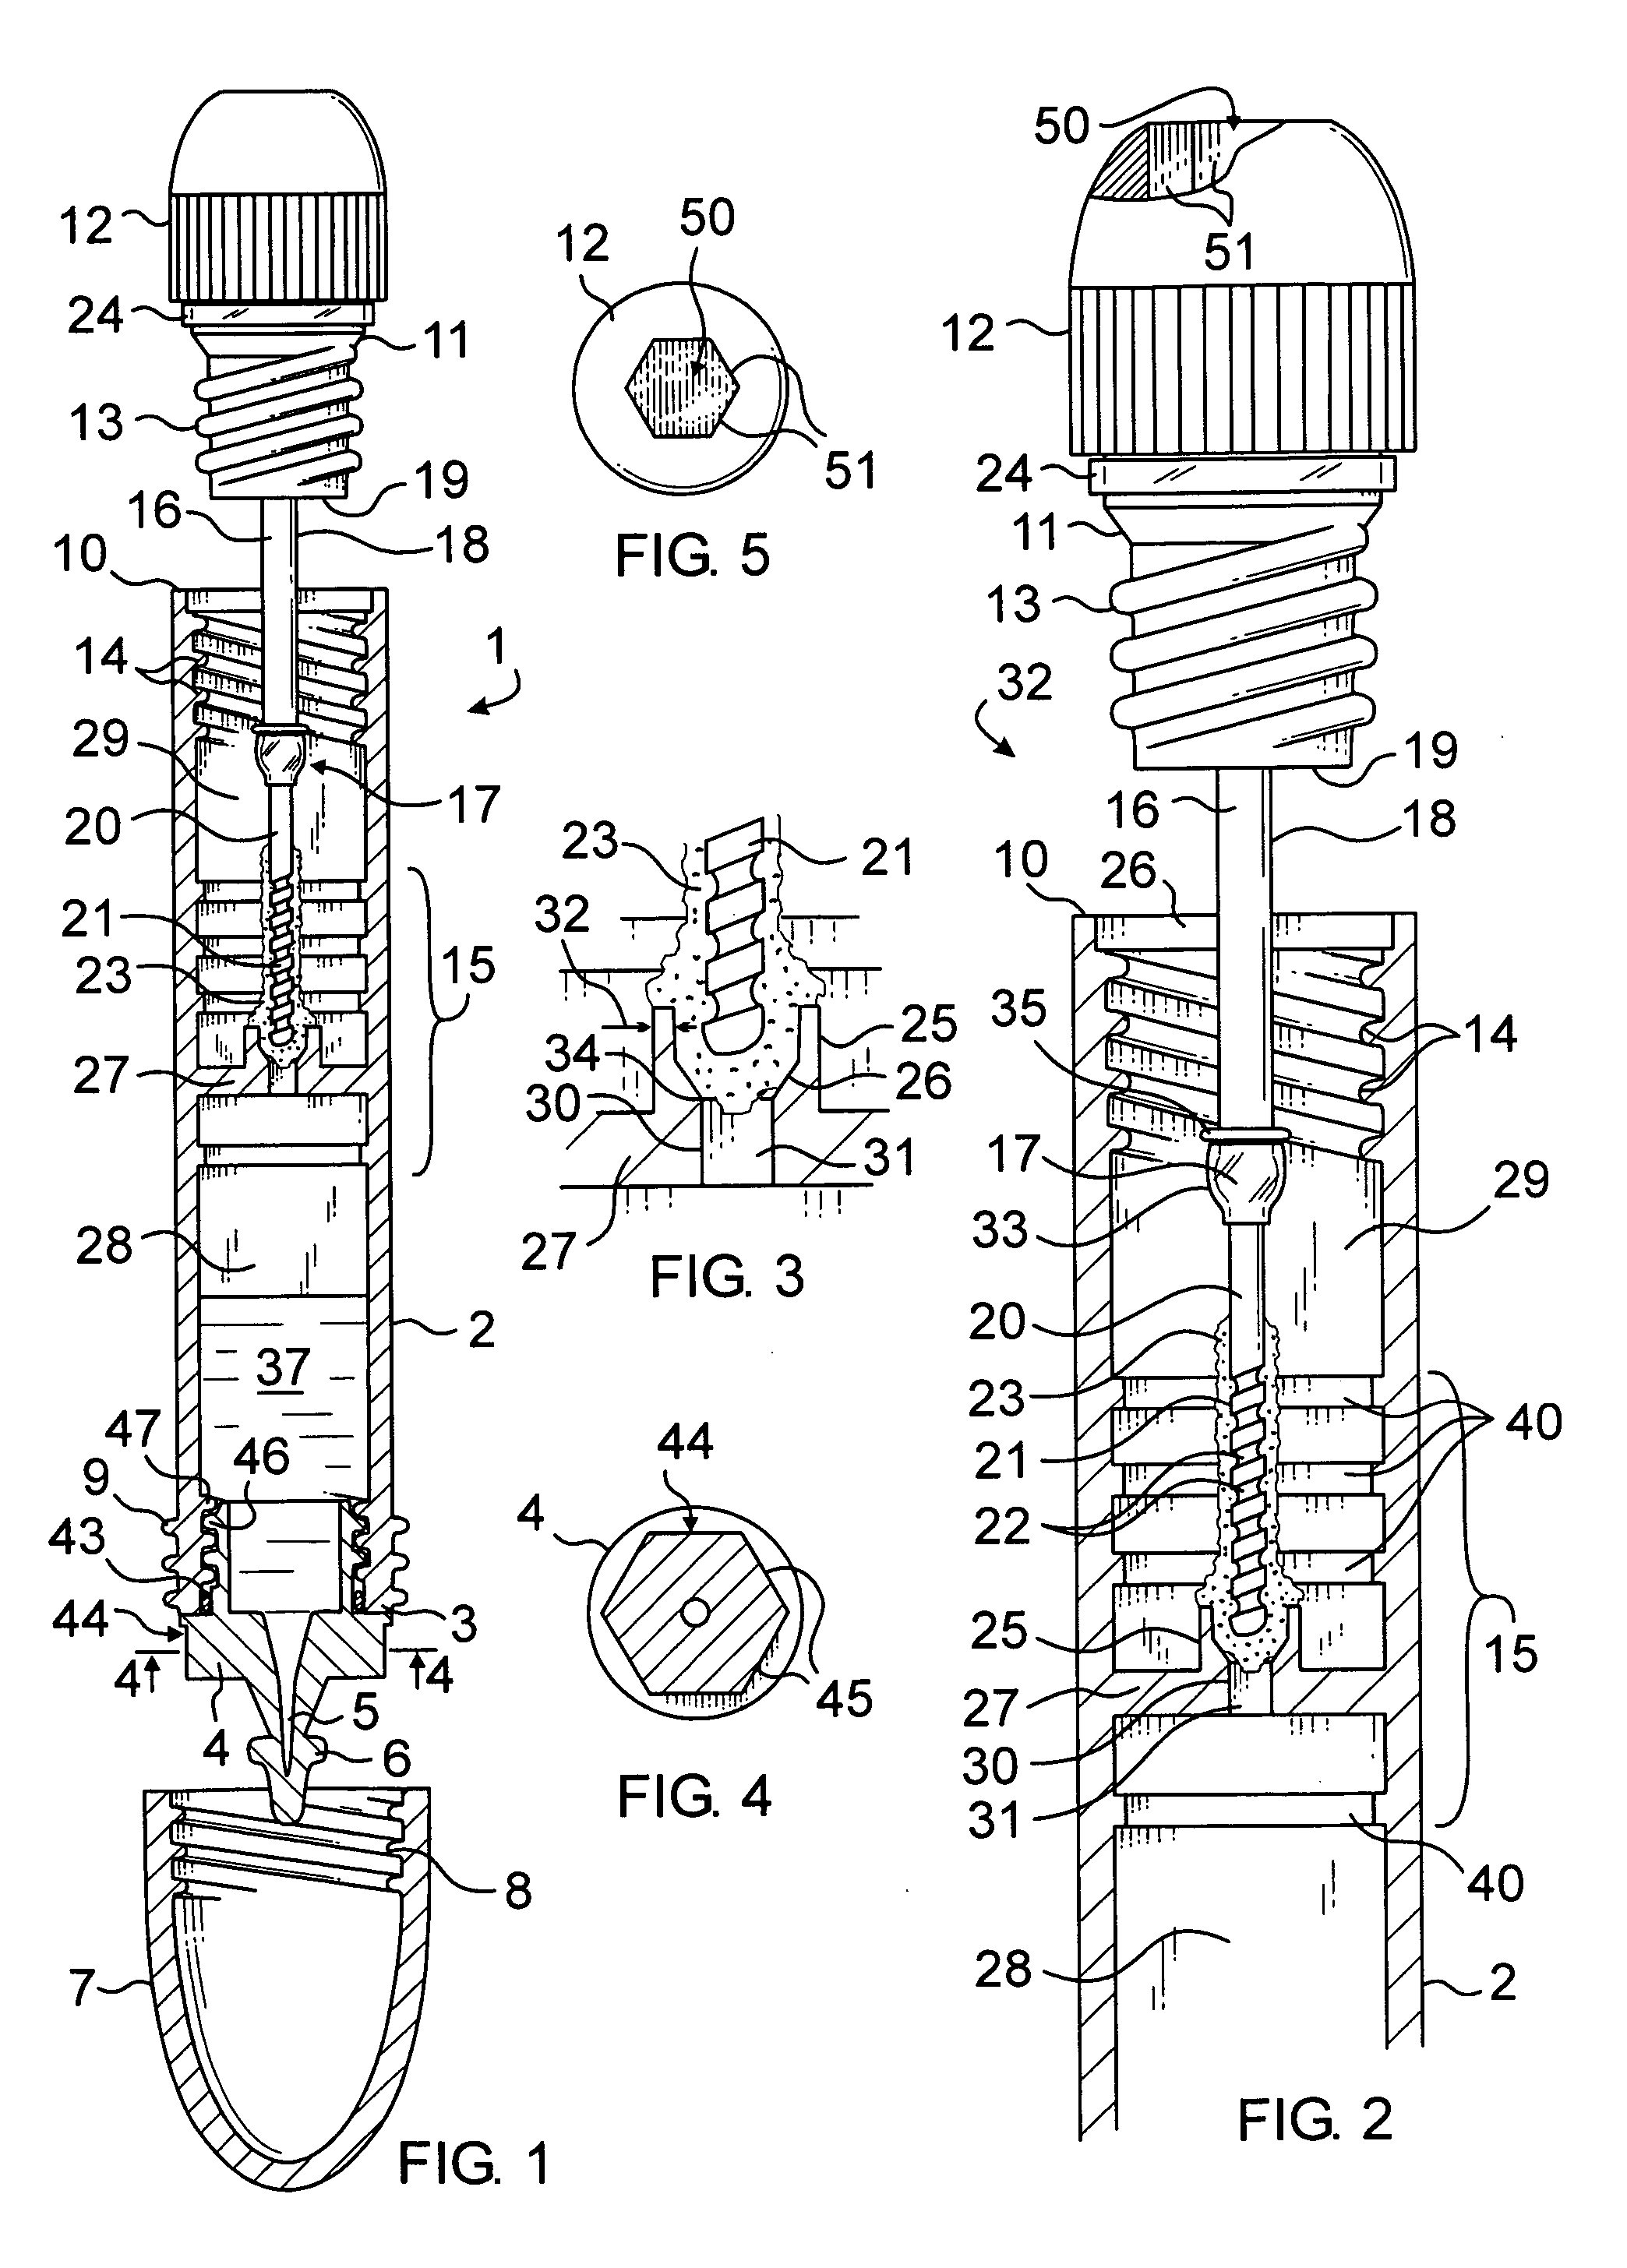 Fecal specimen collection, preserving and transport device and method